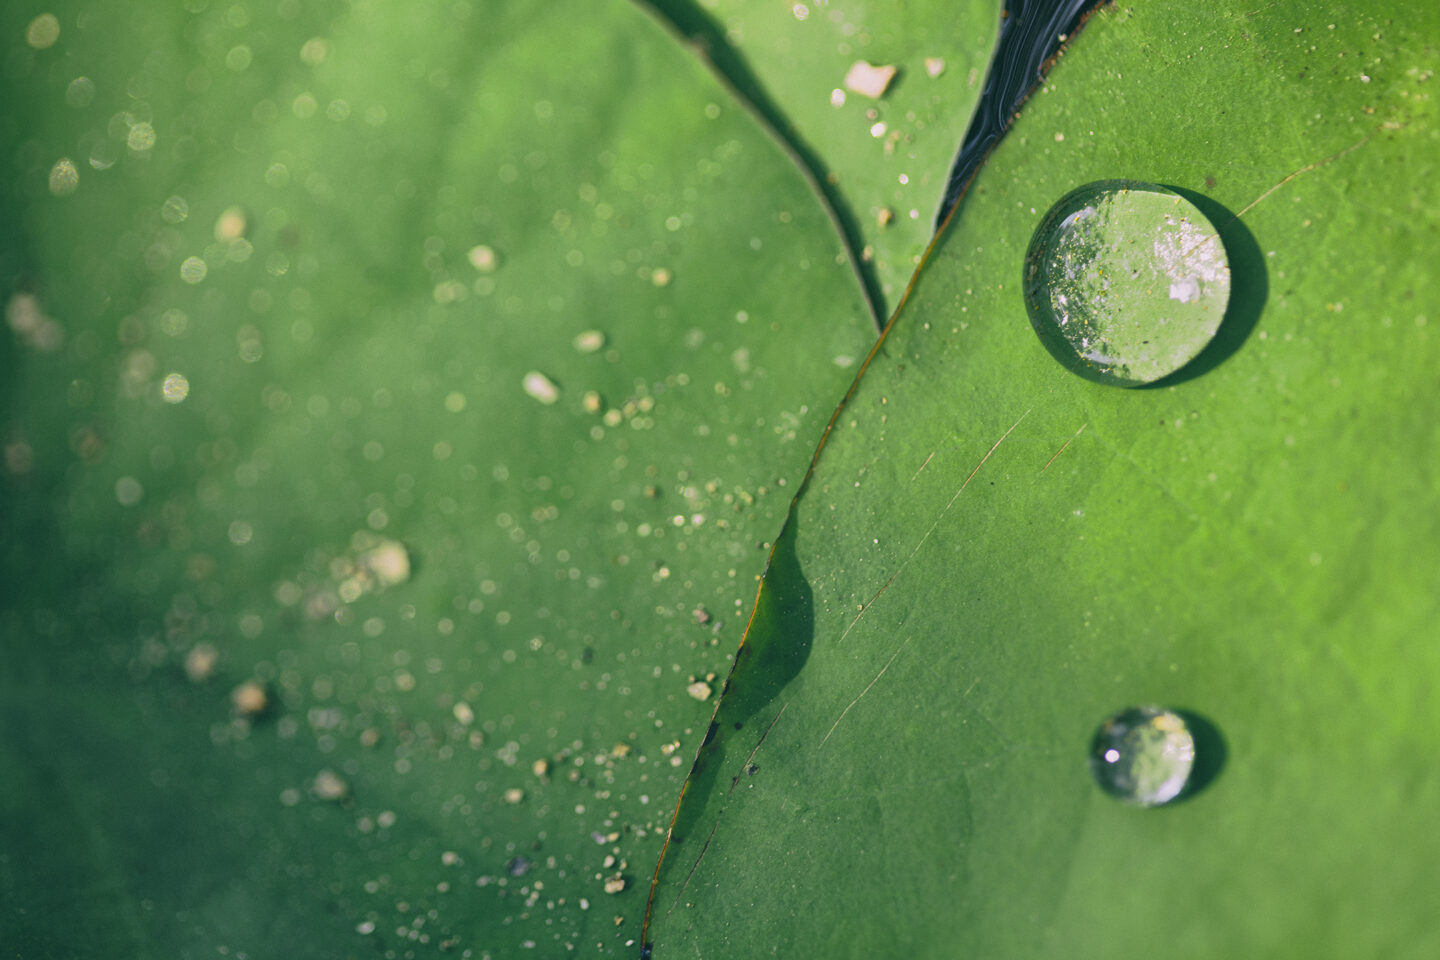 Lotus leaf up close with drops of water by Carol Schiraldi 